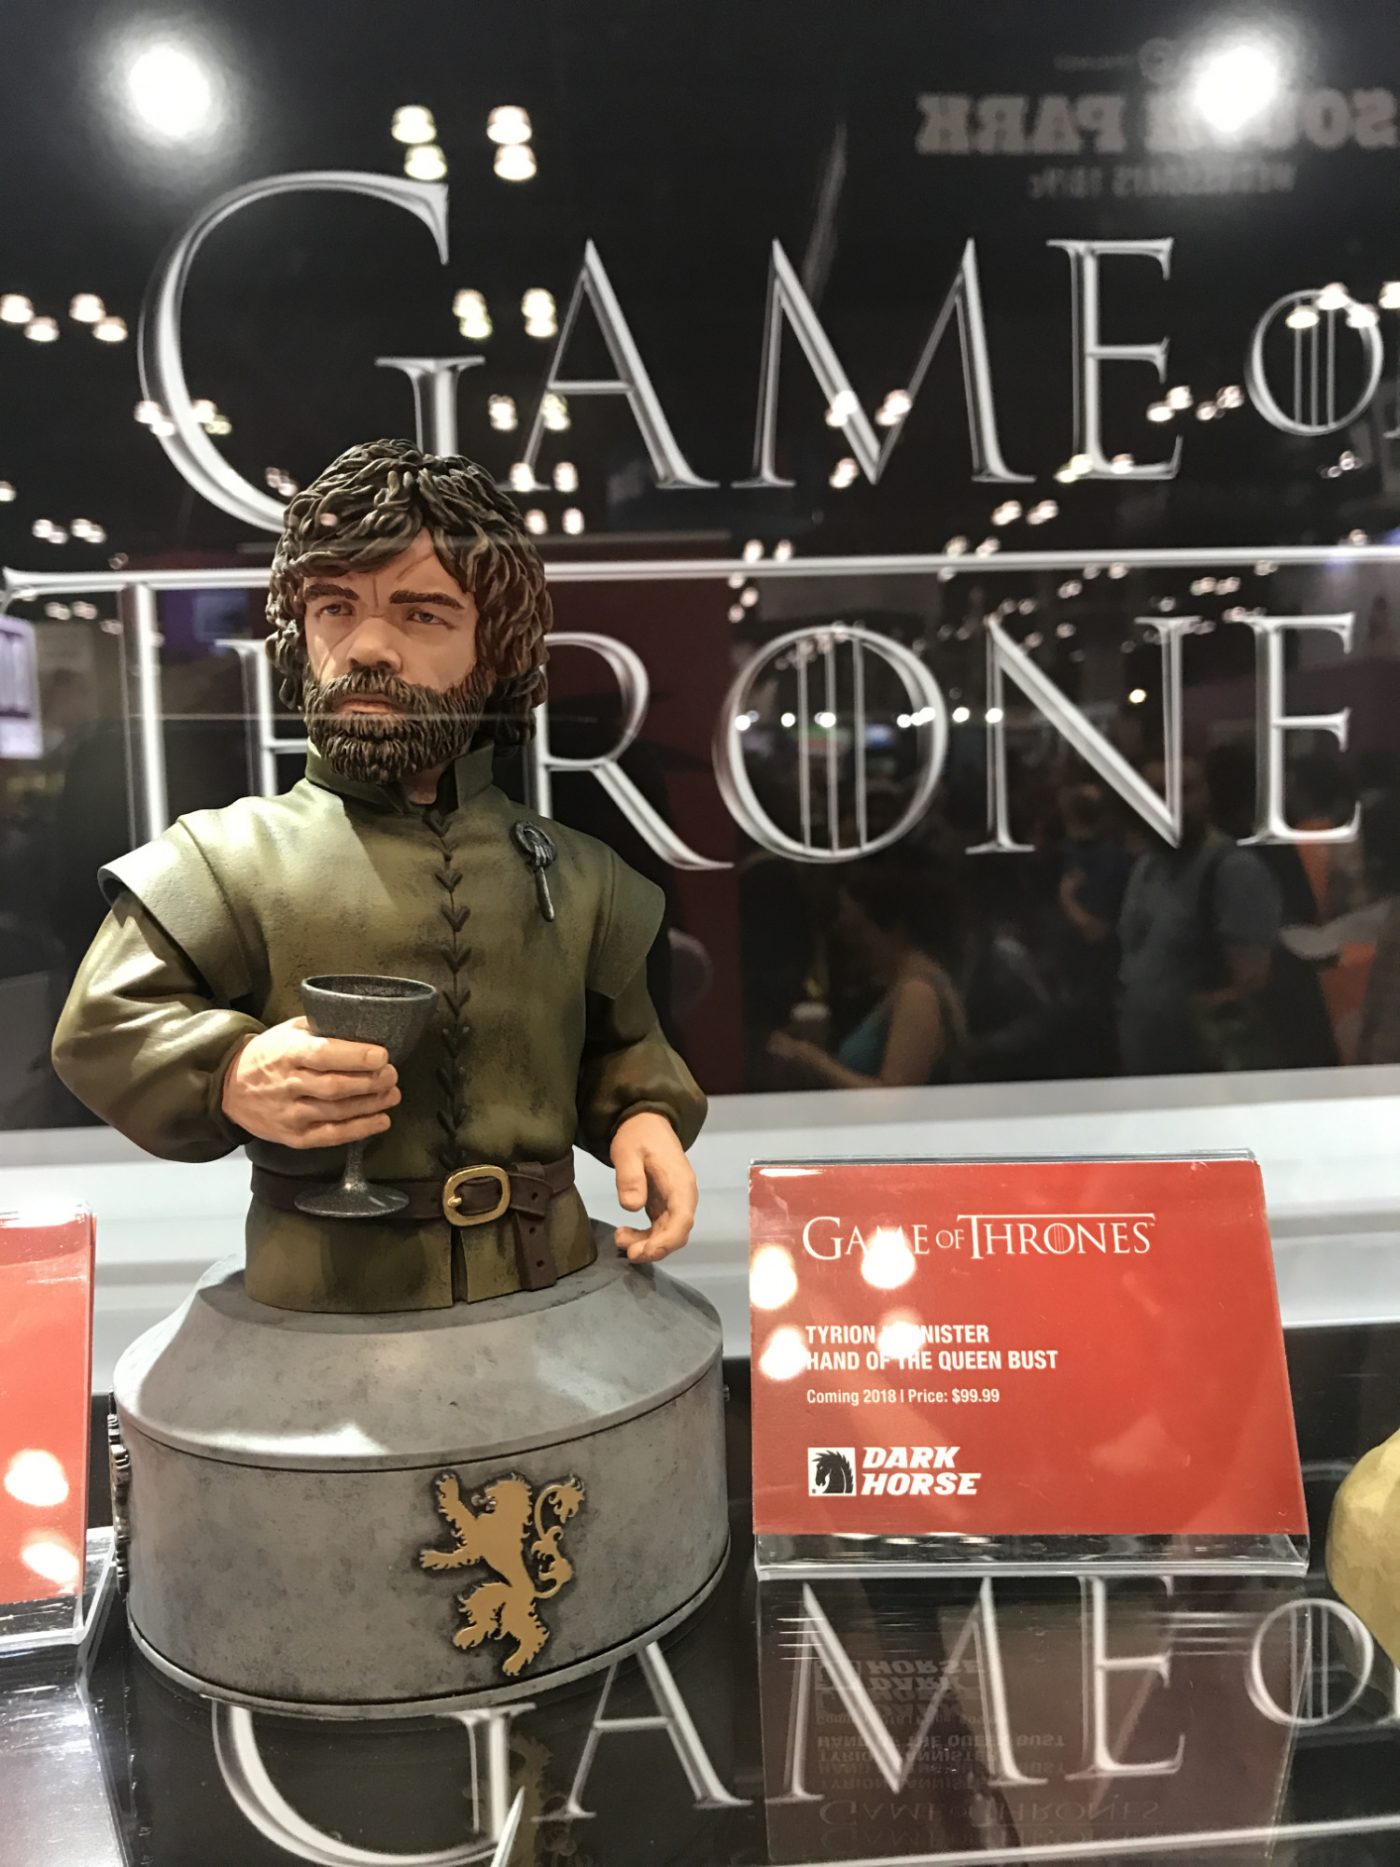 You can own an officially licensed Hodor doorstop, and several